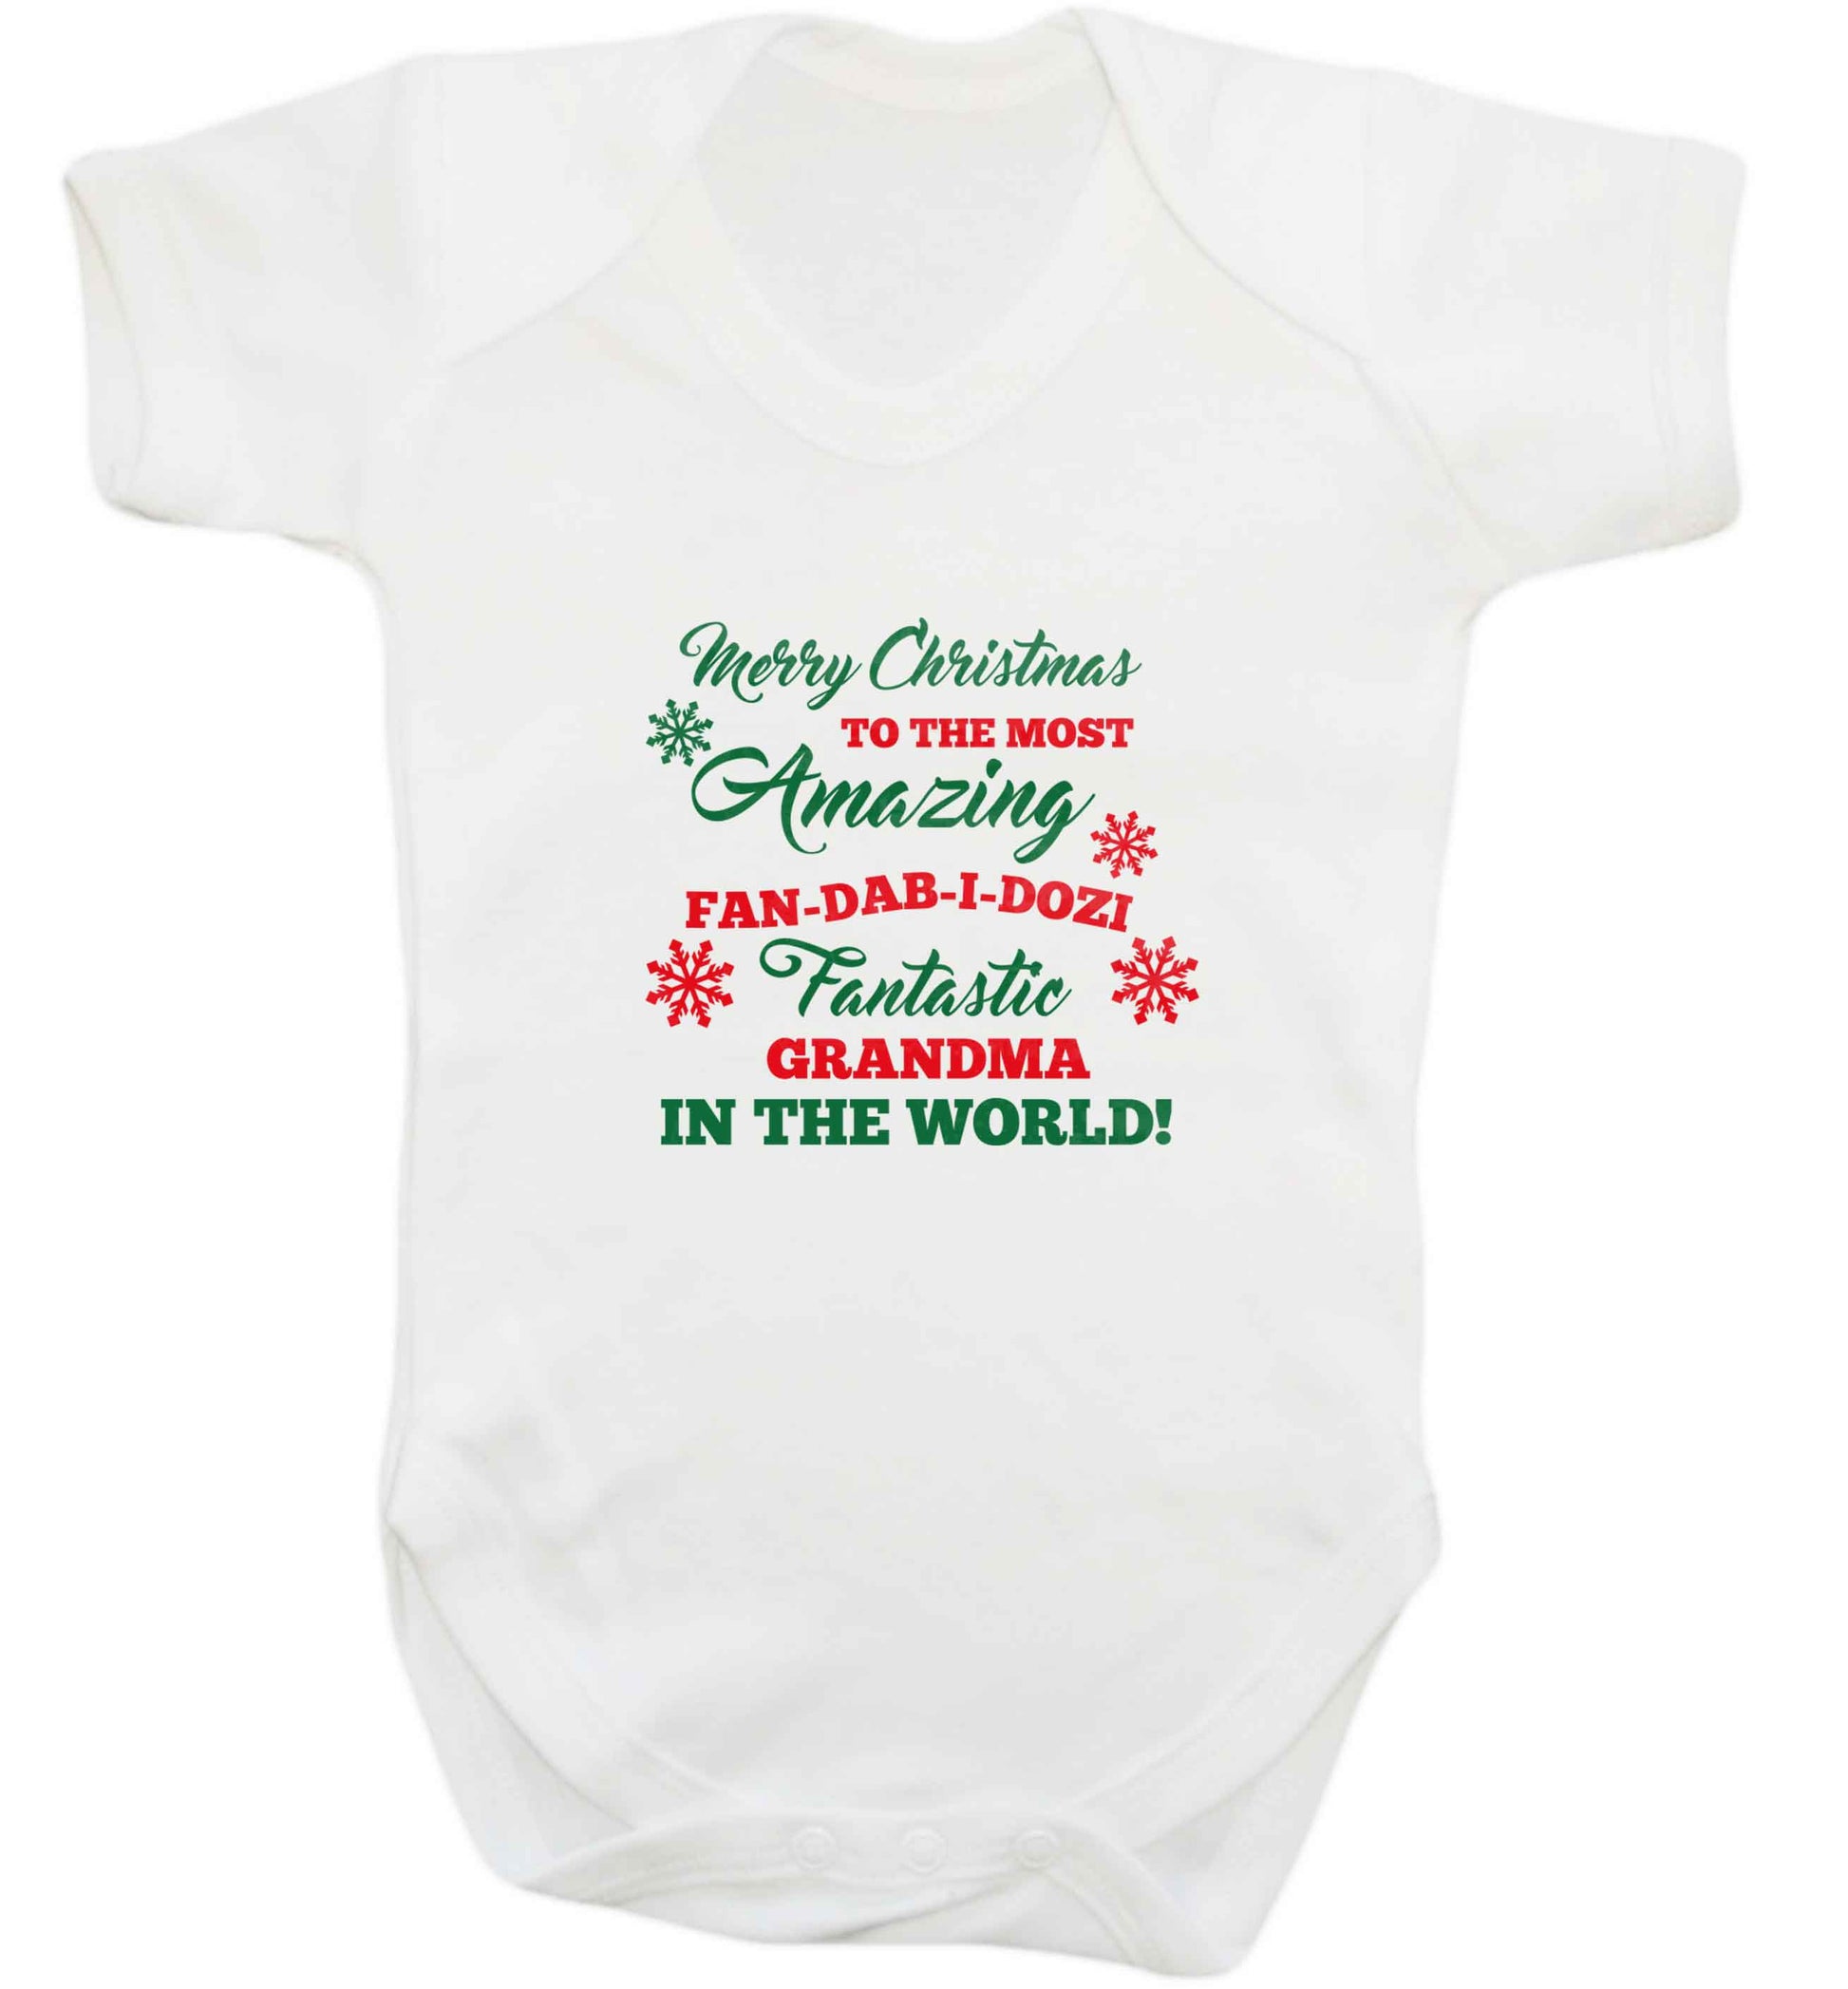 Merry Christmas to the most amazing fan-dab-i-dozi fantasic Grandma in the world baby vest white 18-24 months